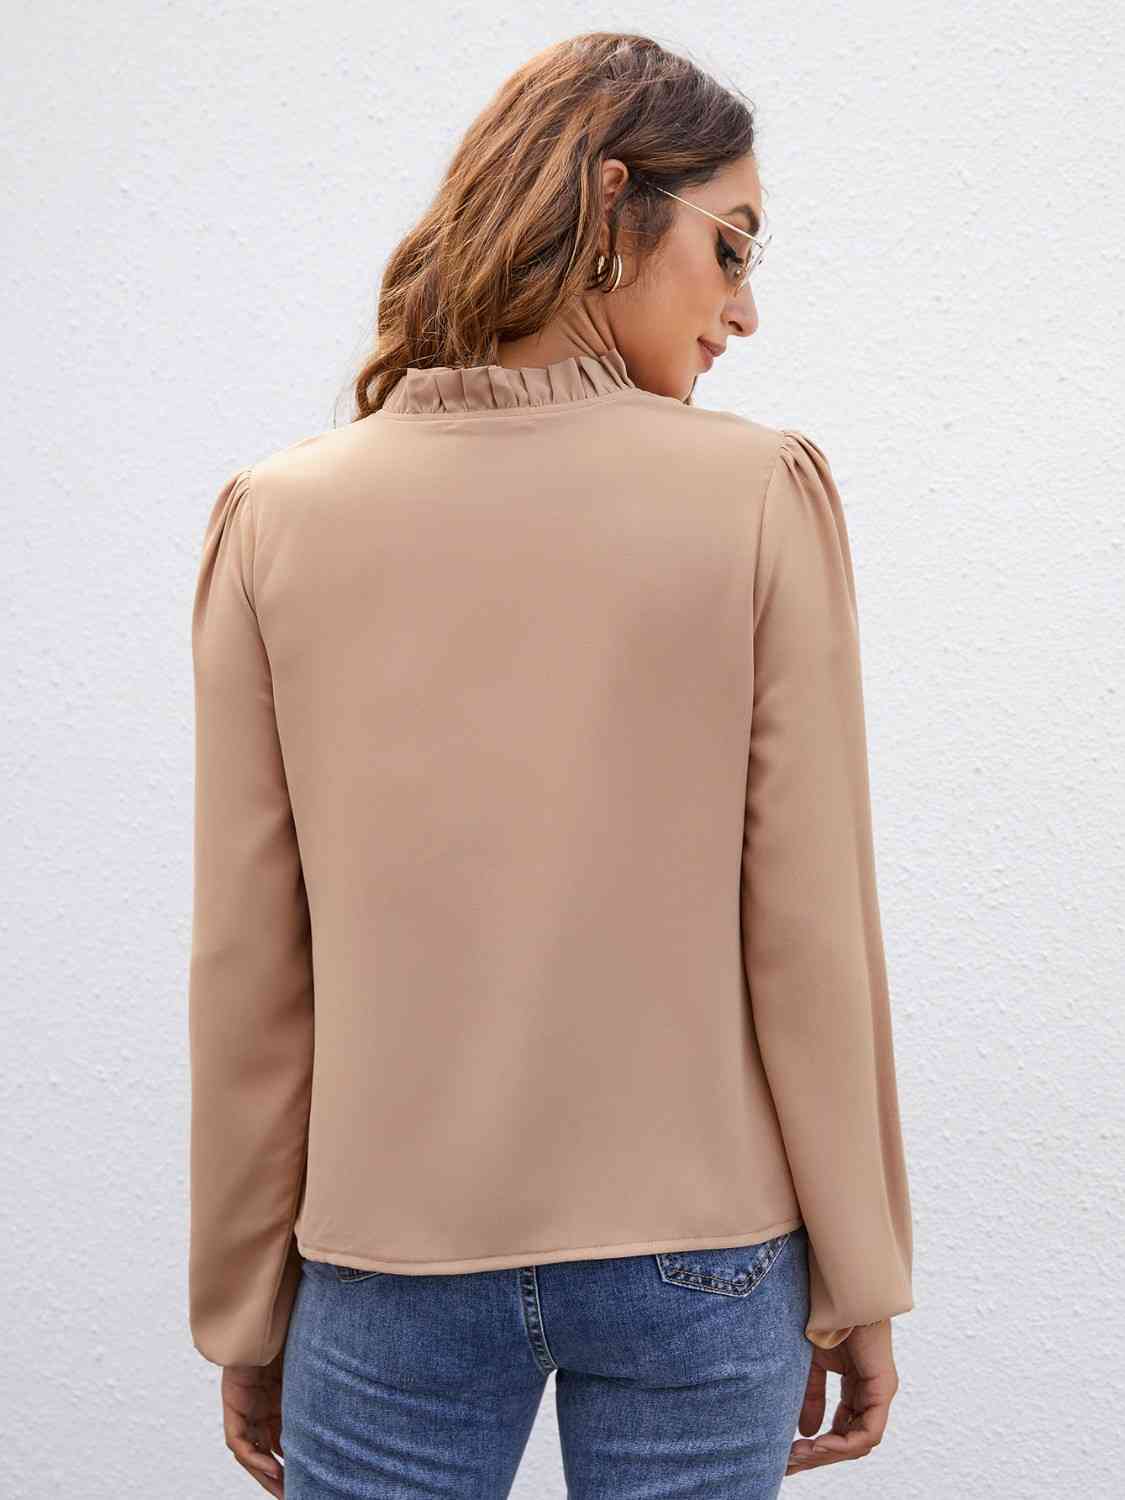 Tie Neck Puff Sleeve Blouse - Tophatter Deals